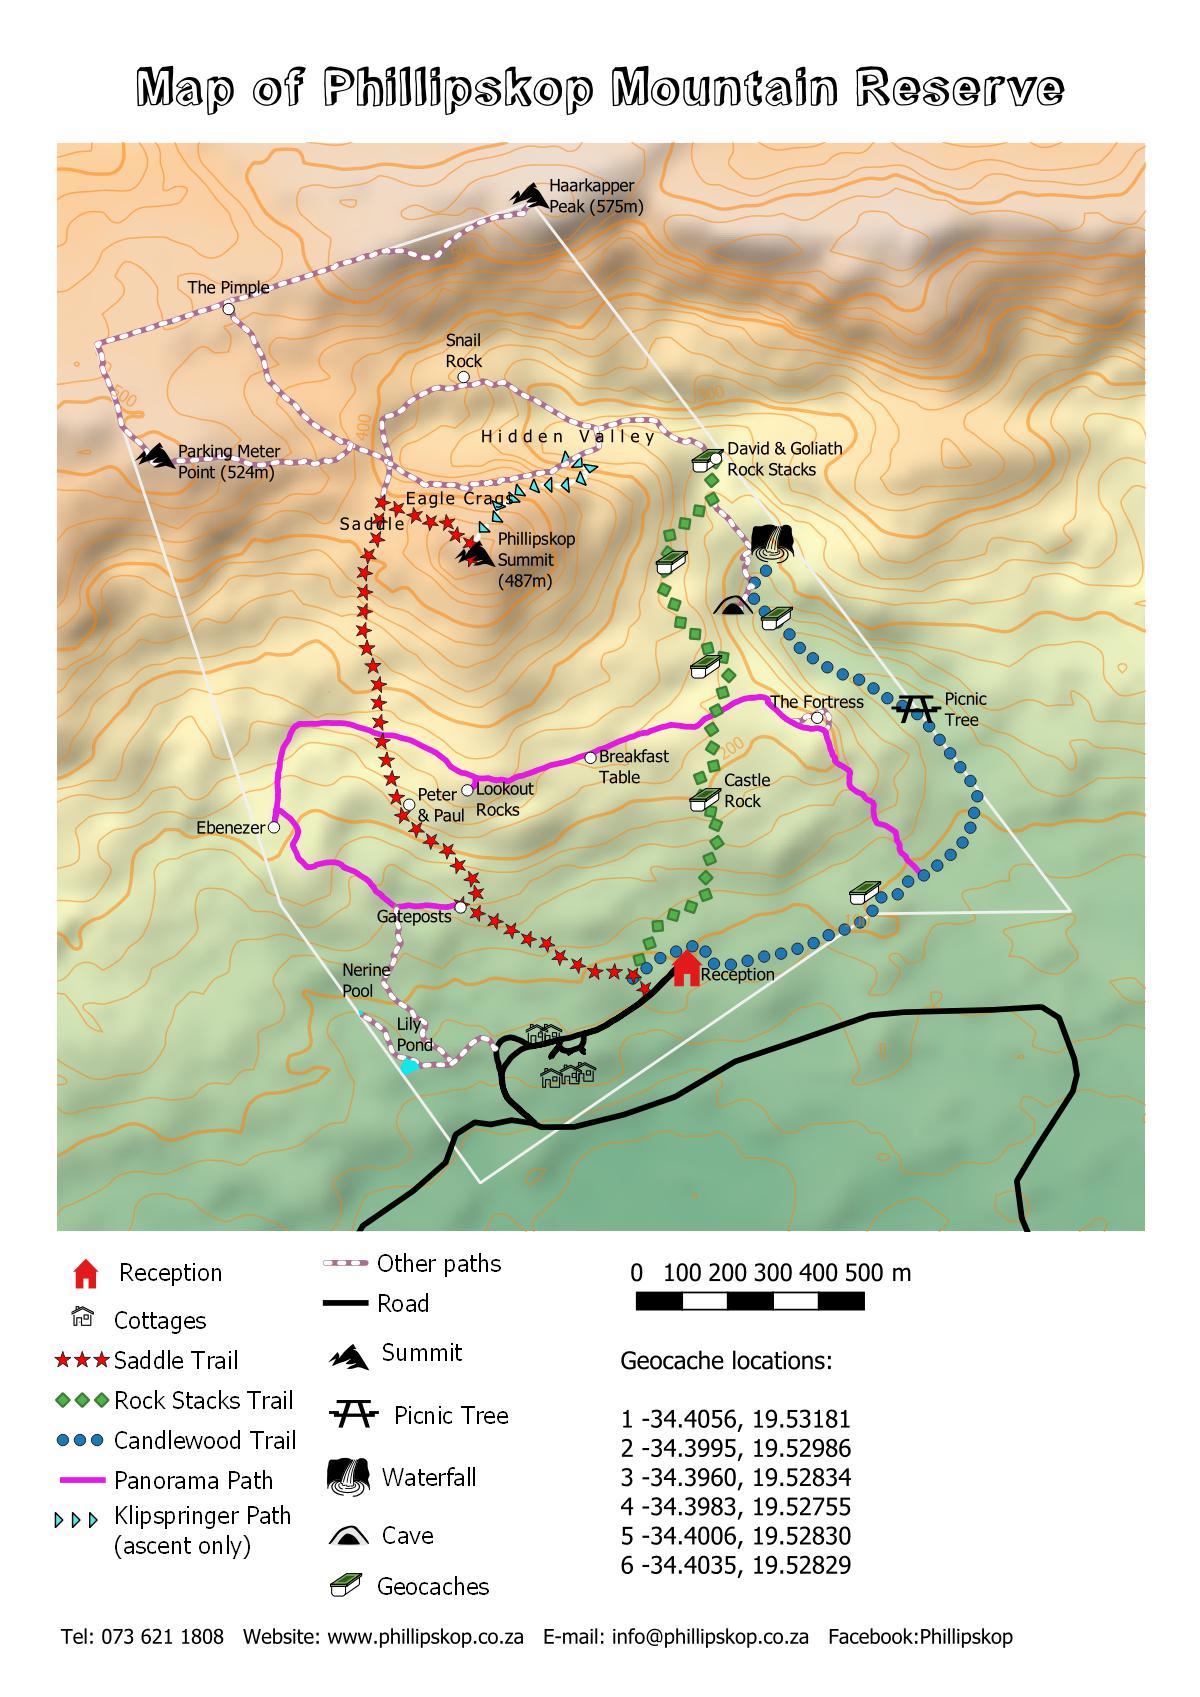 Map of Hiking Trails at Phillipskop Mountain Reserve